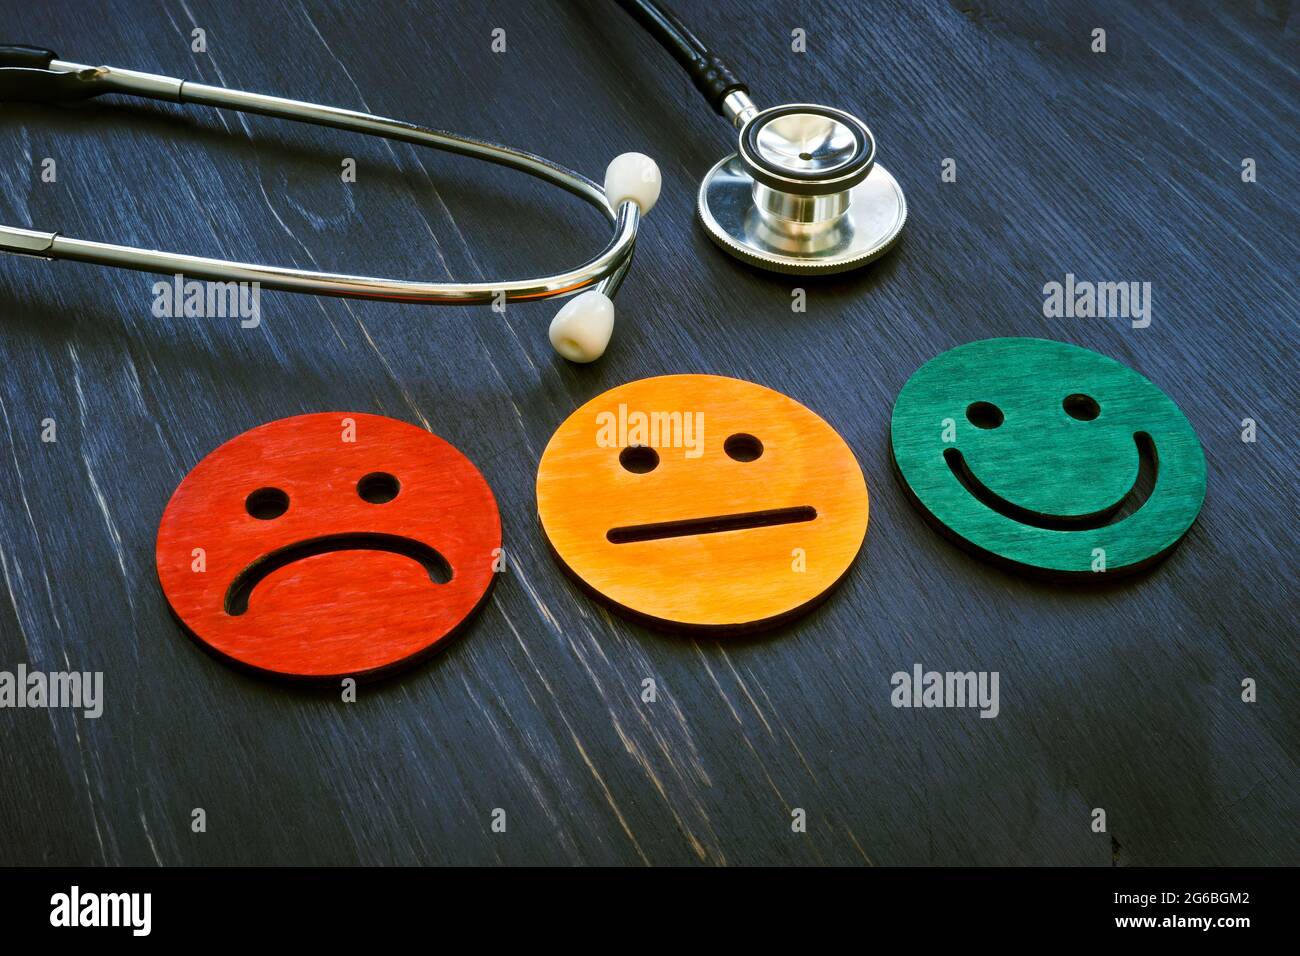 Patient experience concept. Stethoscope and smiled faces for hospital consumer assessment. Stock Photo